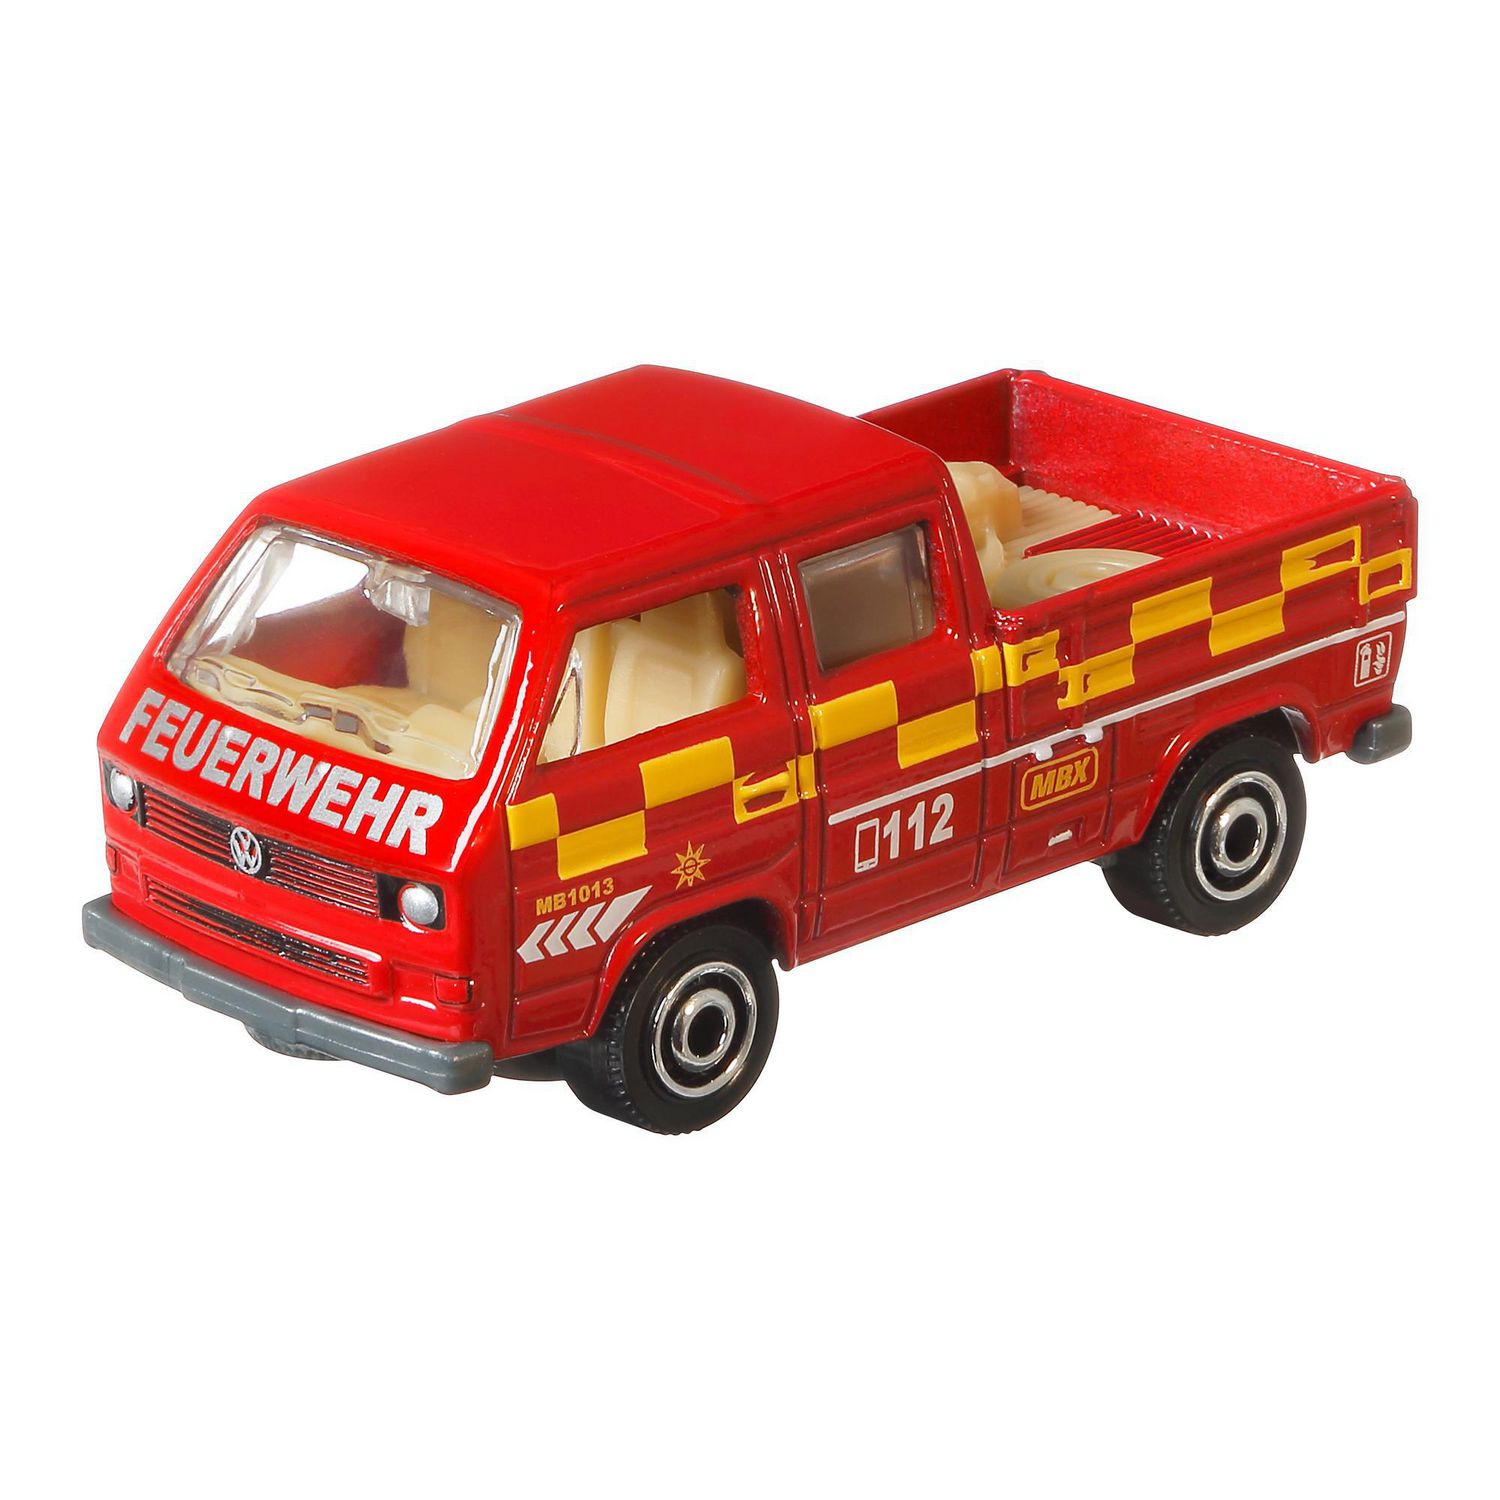 Matchbox Germany Vehicle 1:64 scale German-themed automobiles